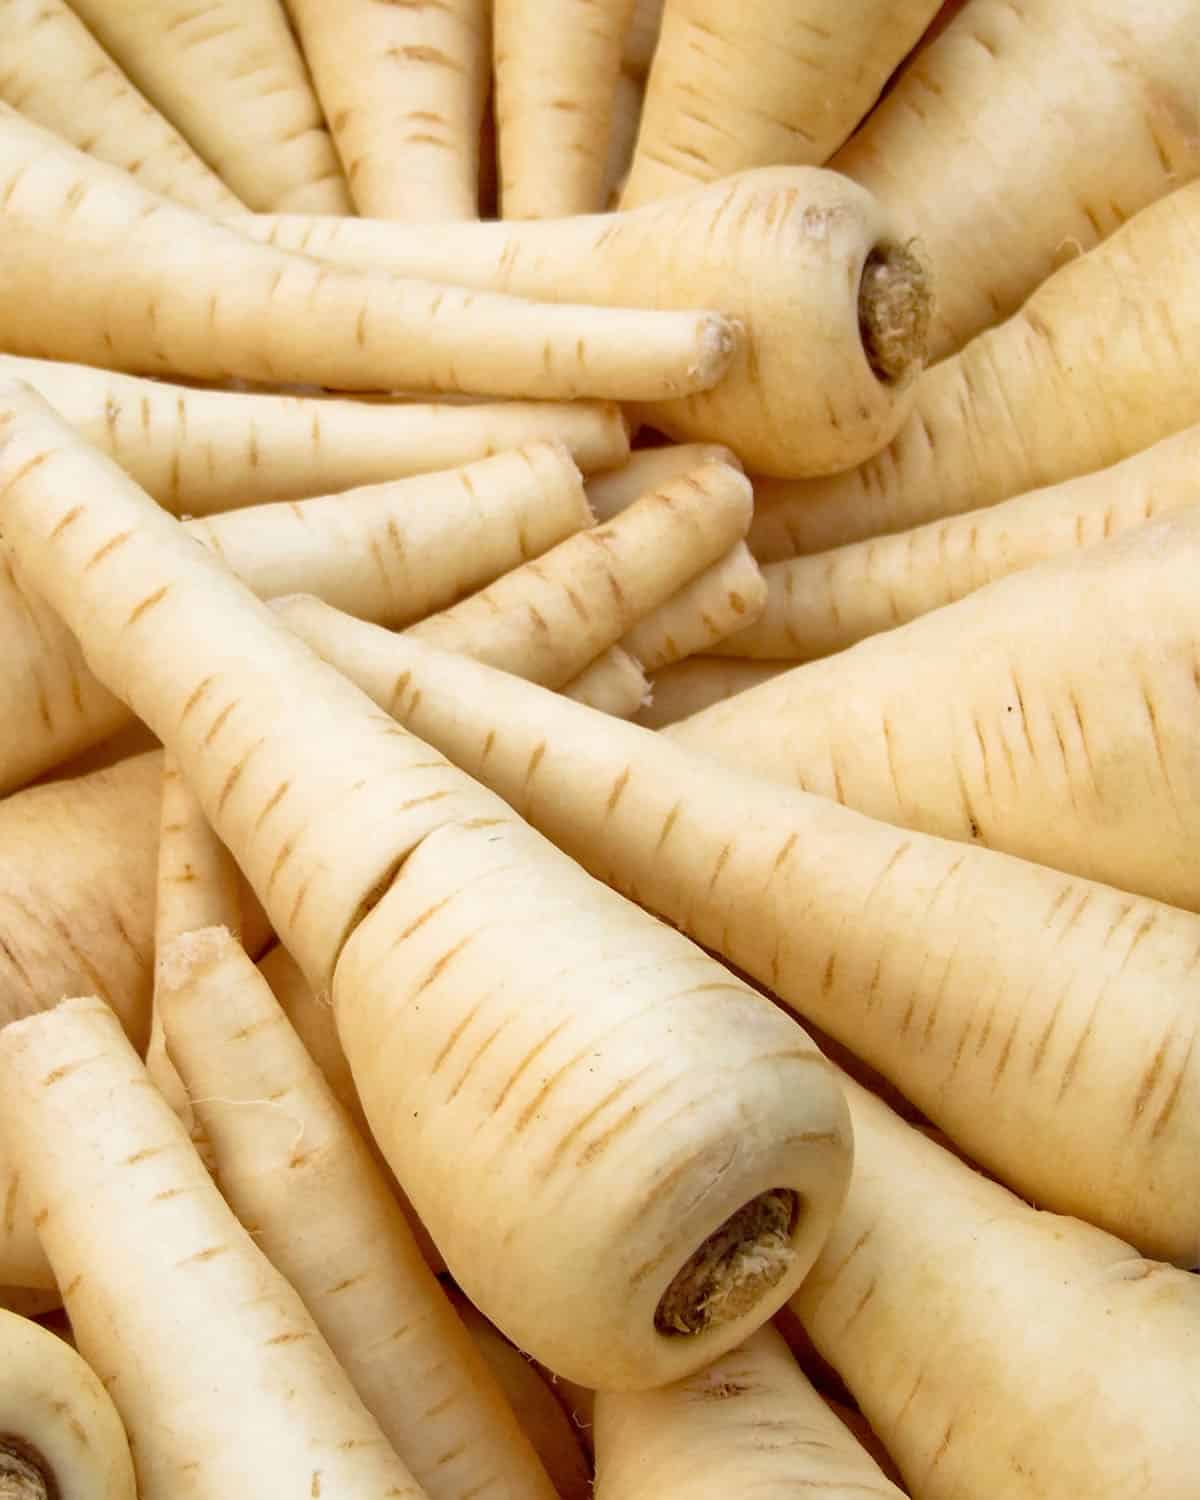 A bunch of parsnips fresh from harvest fill the frame of a photo, showcasing this October seasonal veggie.